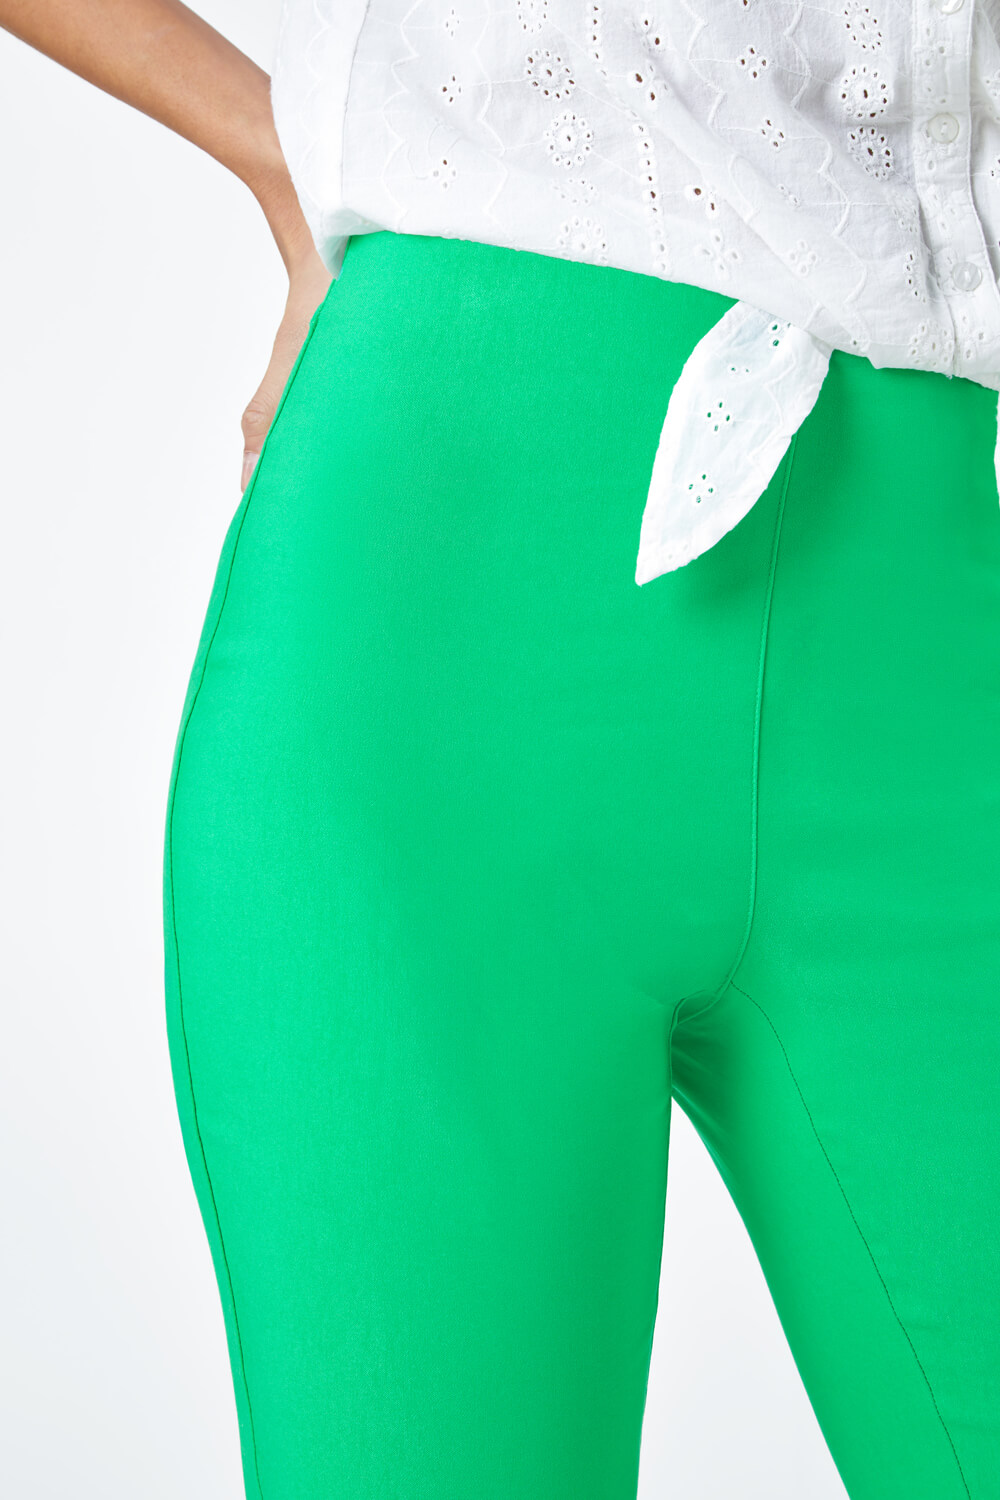 Pale Green Knee Length Stretch Shorts, Image 5 of 5